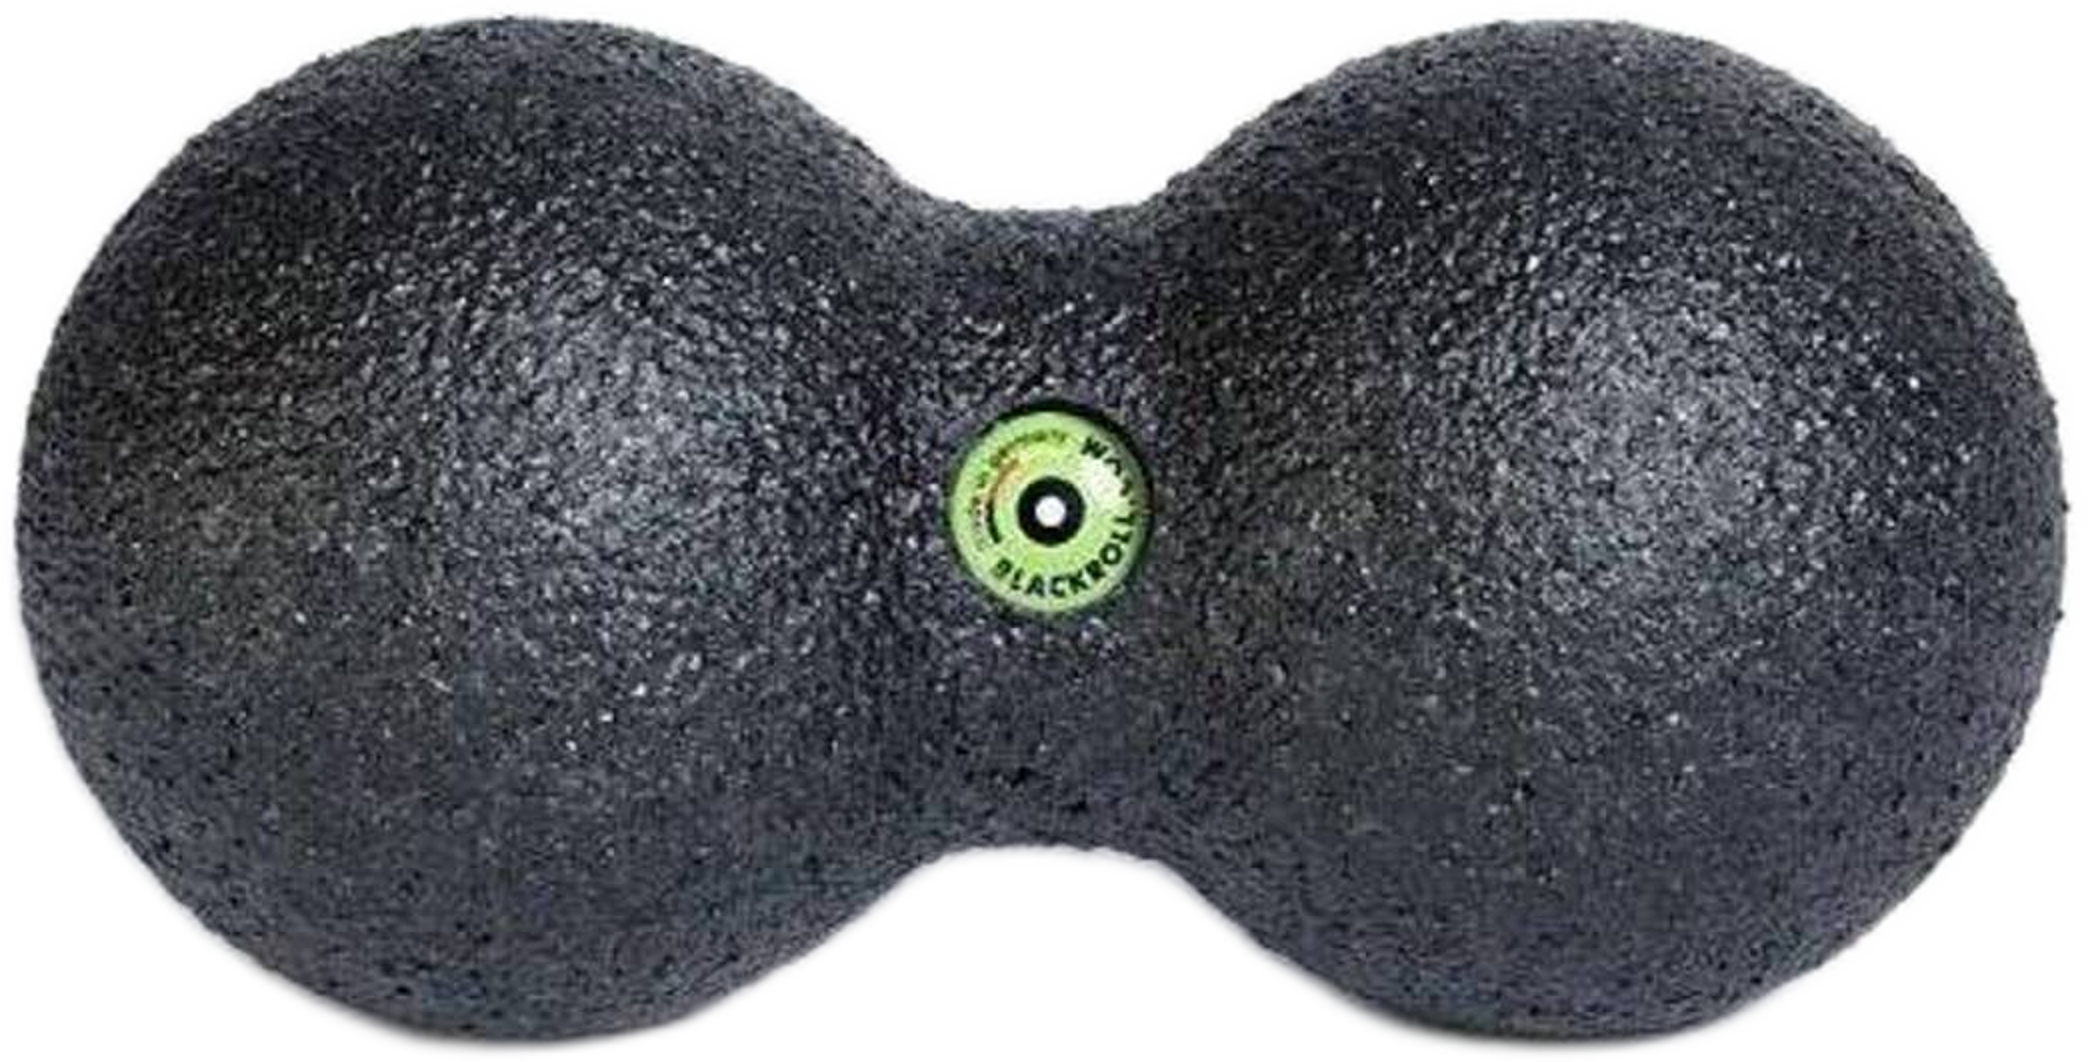 Blackroll Duoball 12 Massage Ball for Deep Tissue & Trigger Point Release Muscle Recovery & Pain Relief - Black - ActiveLifeUSA.com